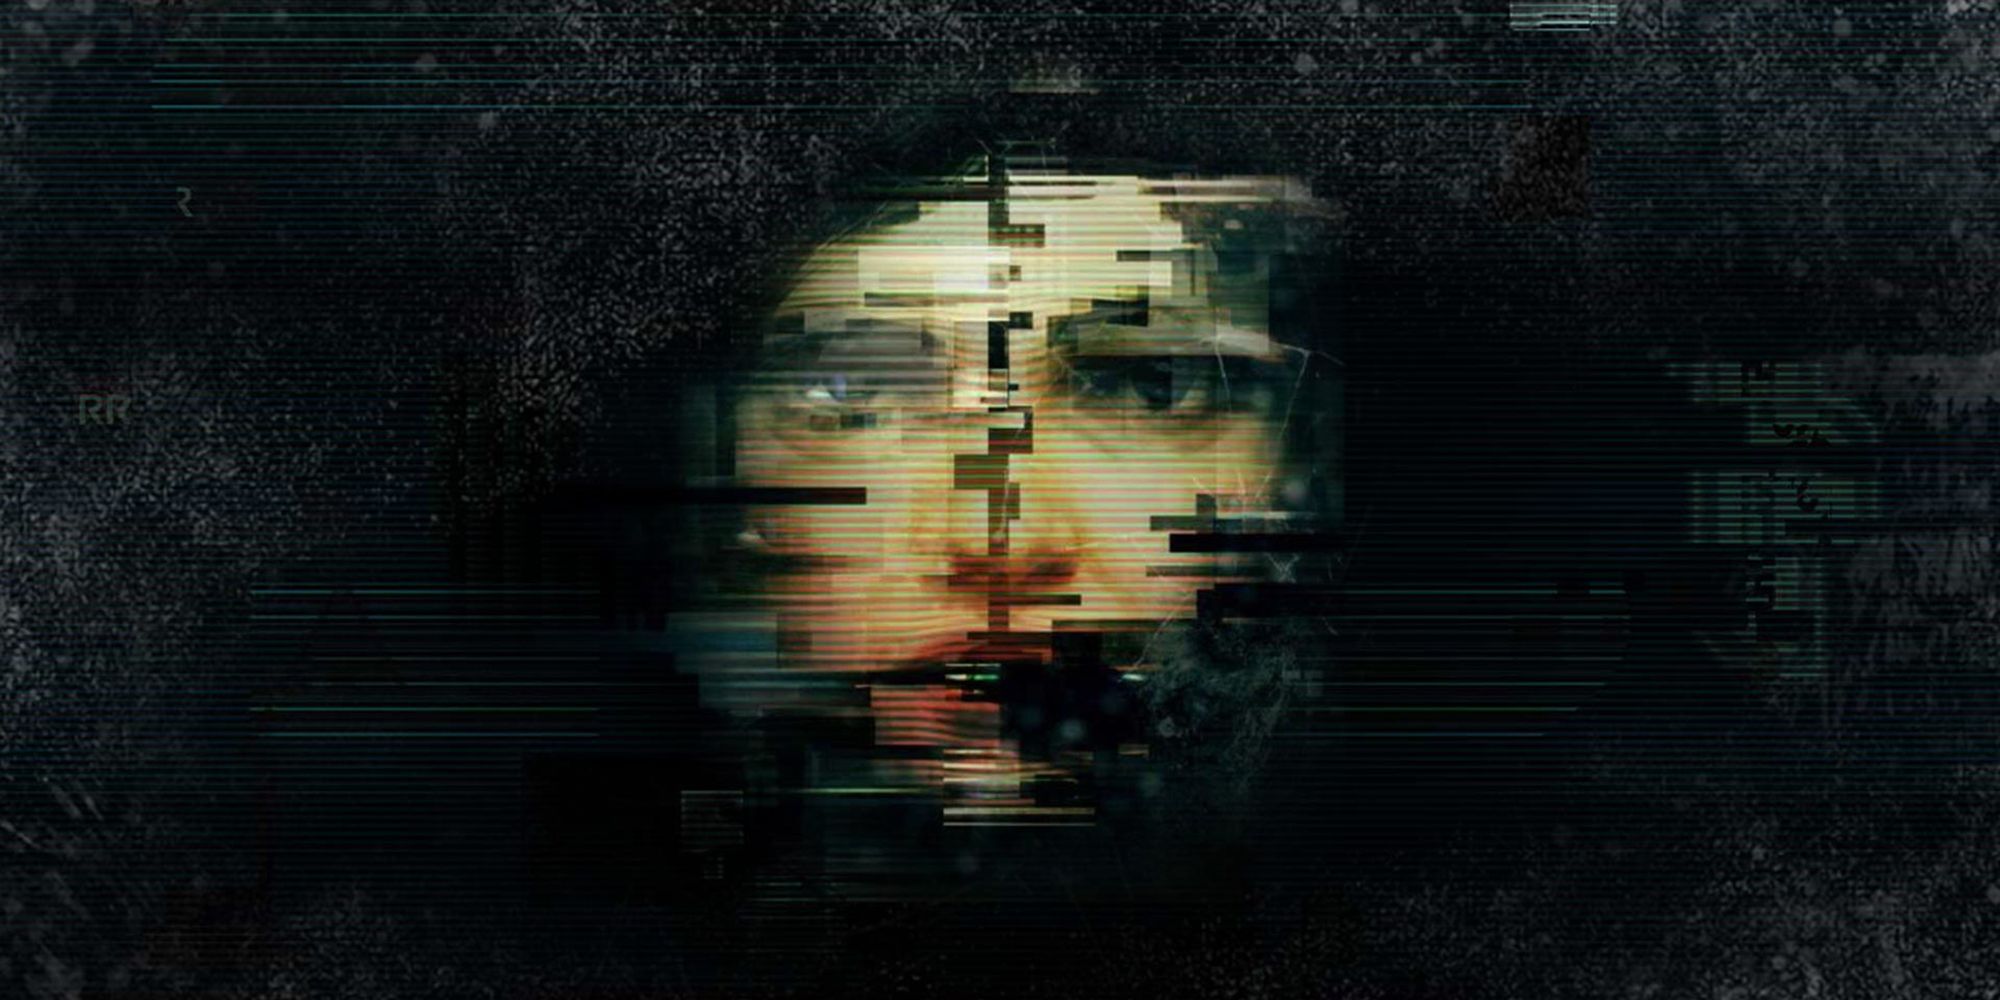 A digital face of a human split down the middle and warped.